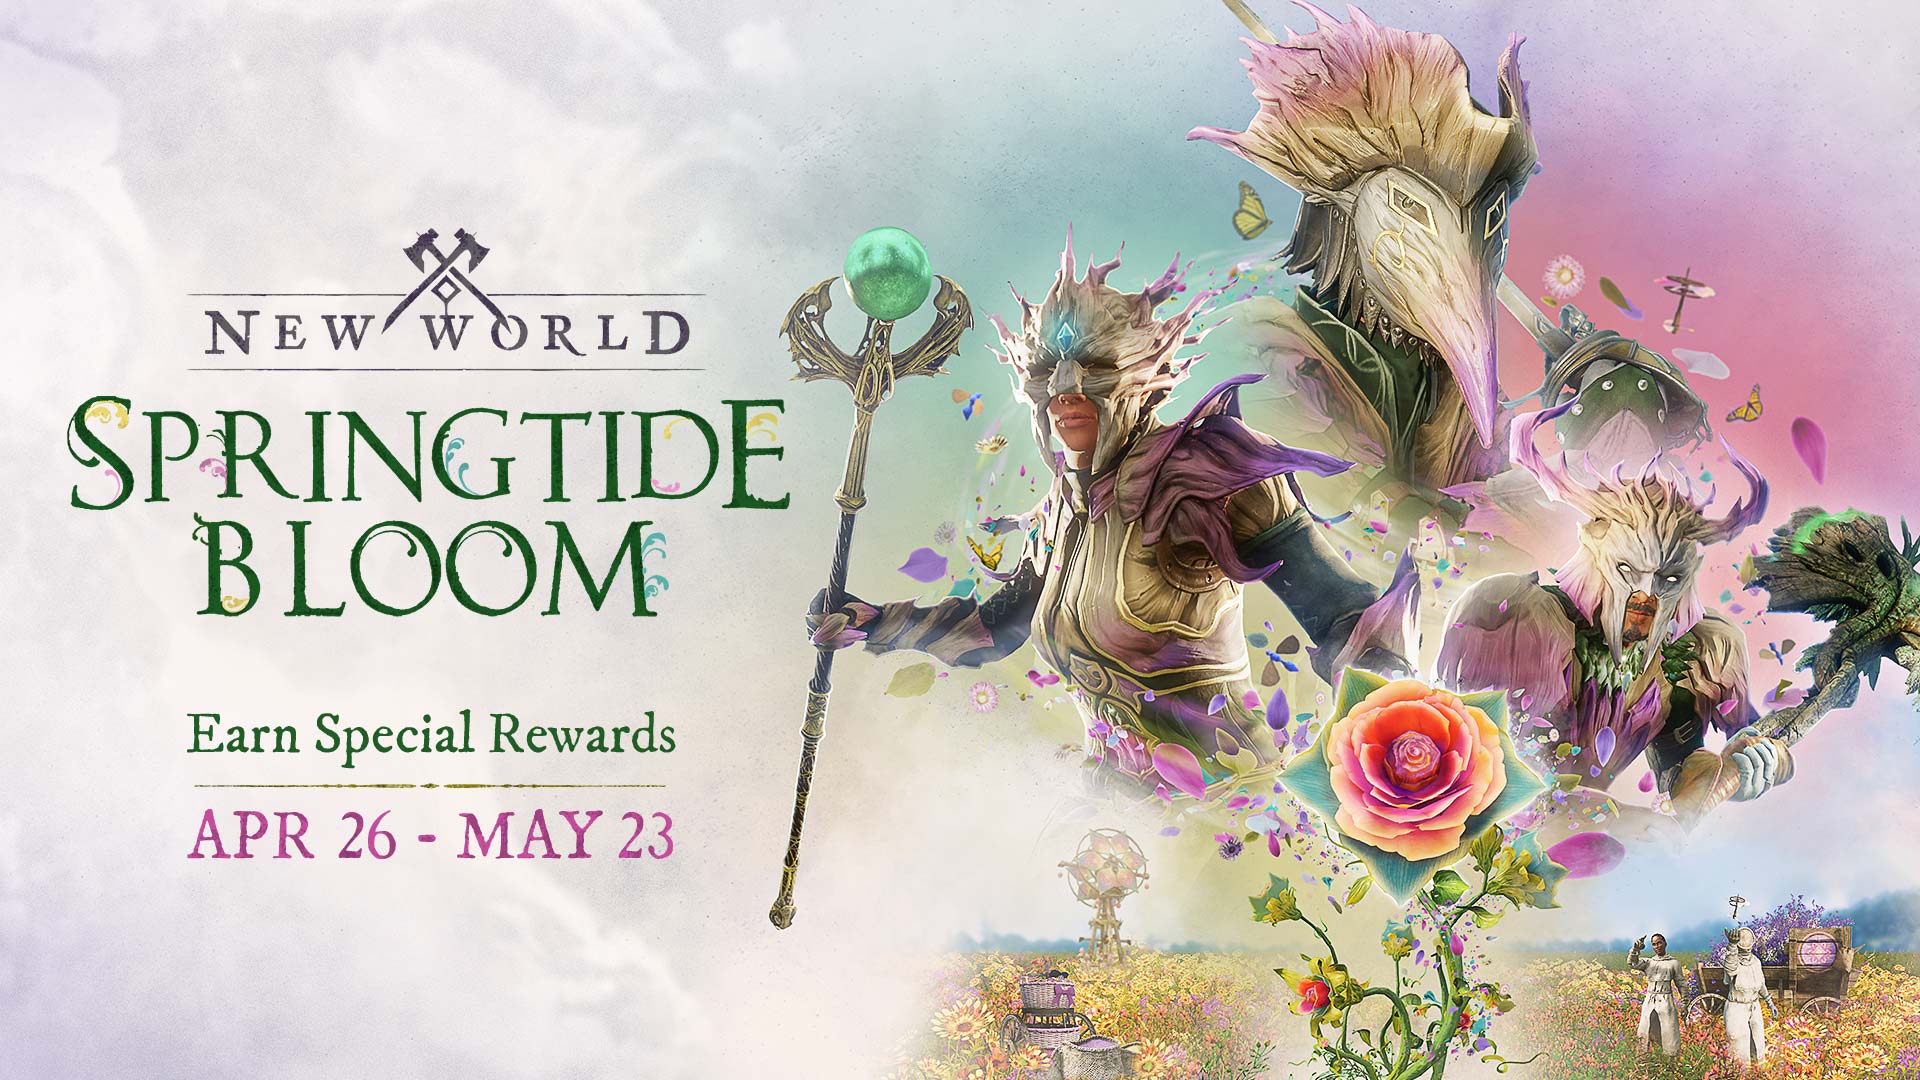 New World's Springtime Bloom event is now live